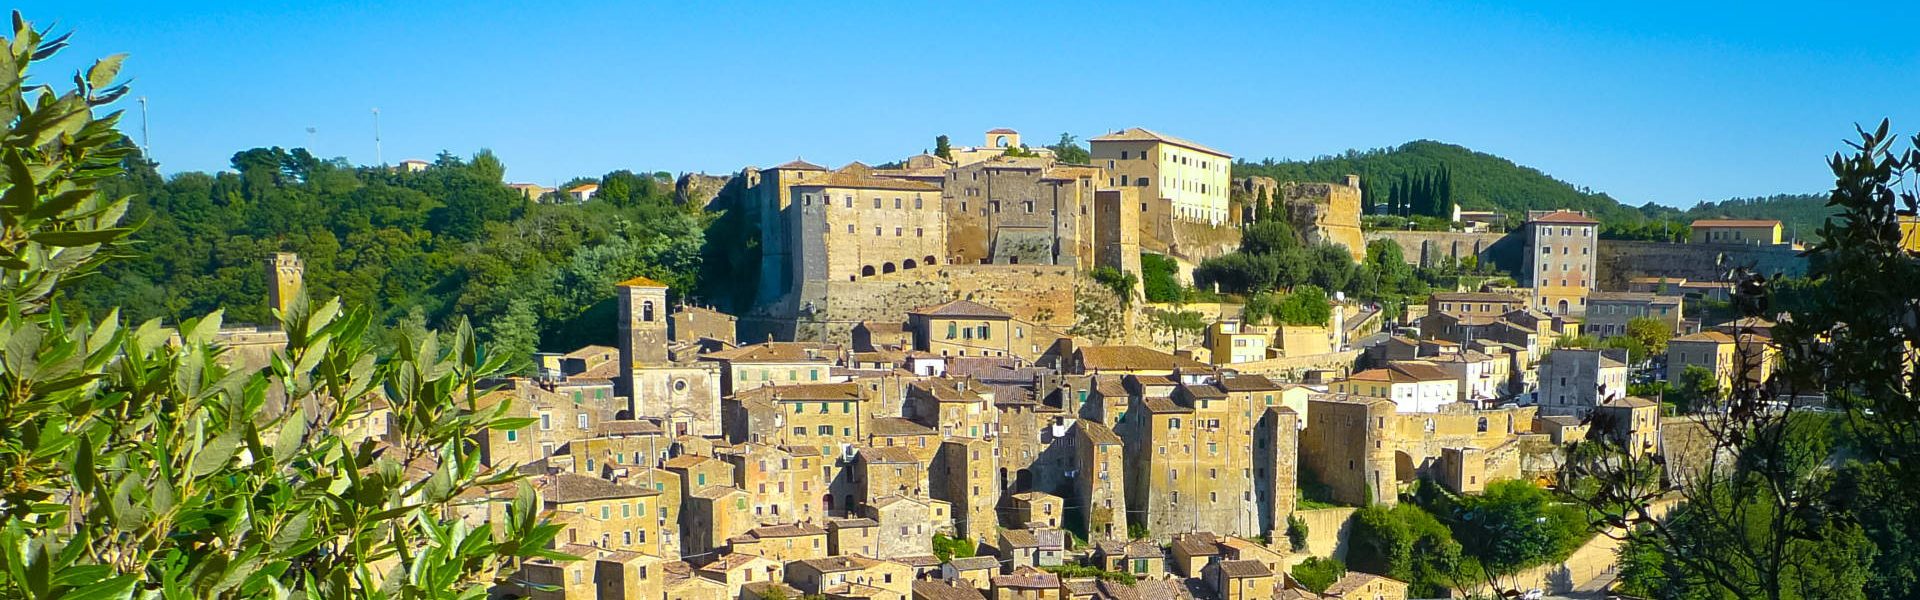 Picturesque medieval town of Sorano, Grosseto, Tuscany, Italy